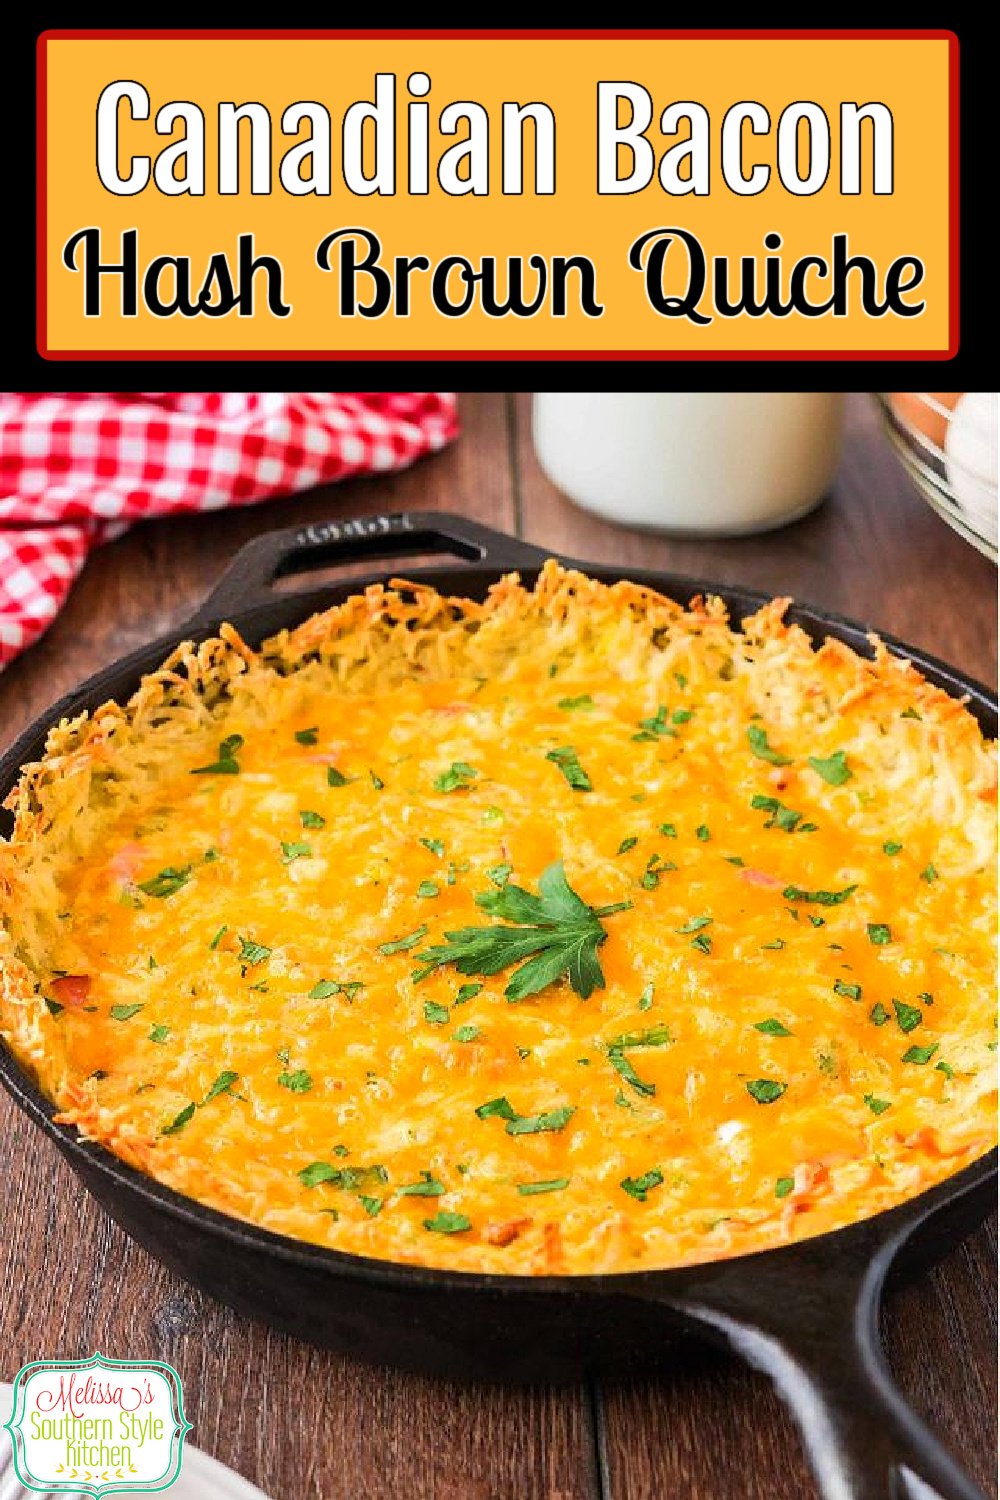 Skip the pastry crust and make this Canadian Bacon Hash Brown Quiche using a crispy shredded hash brown potato crust, instead #quiche #hashbrowns #hashbrownquiche #quicherecipes #bestquicherecipes via @melissasssk